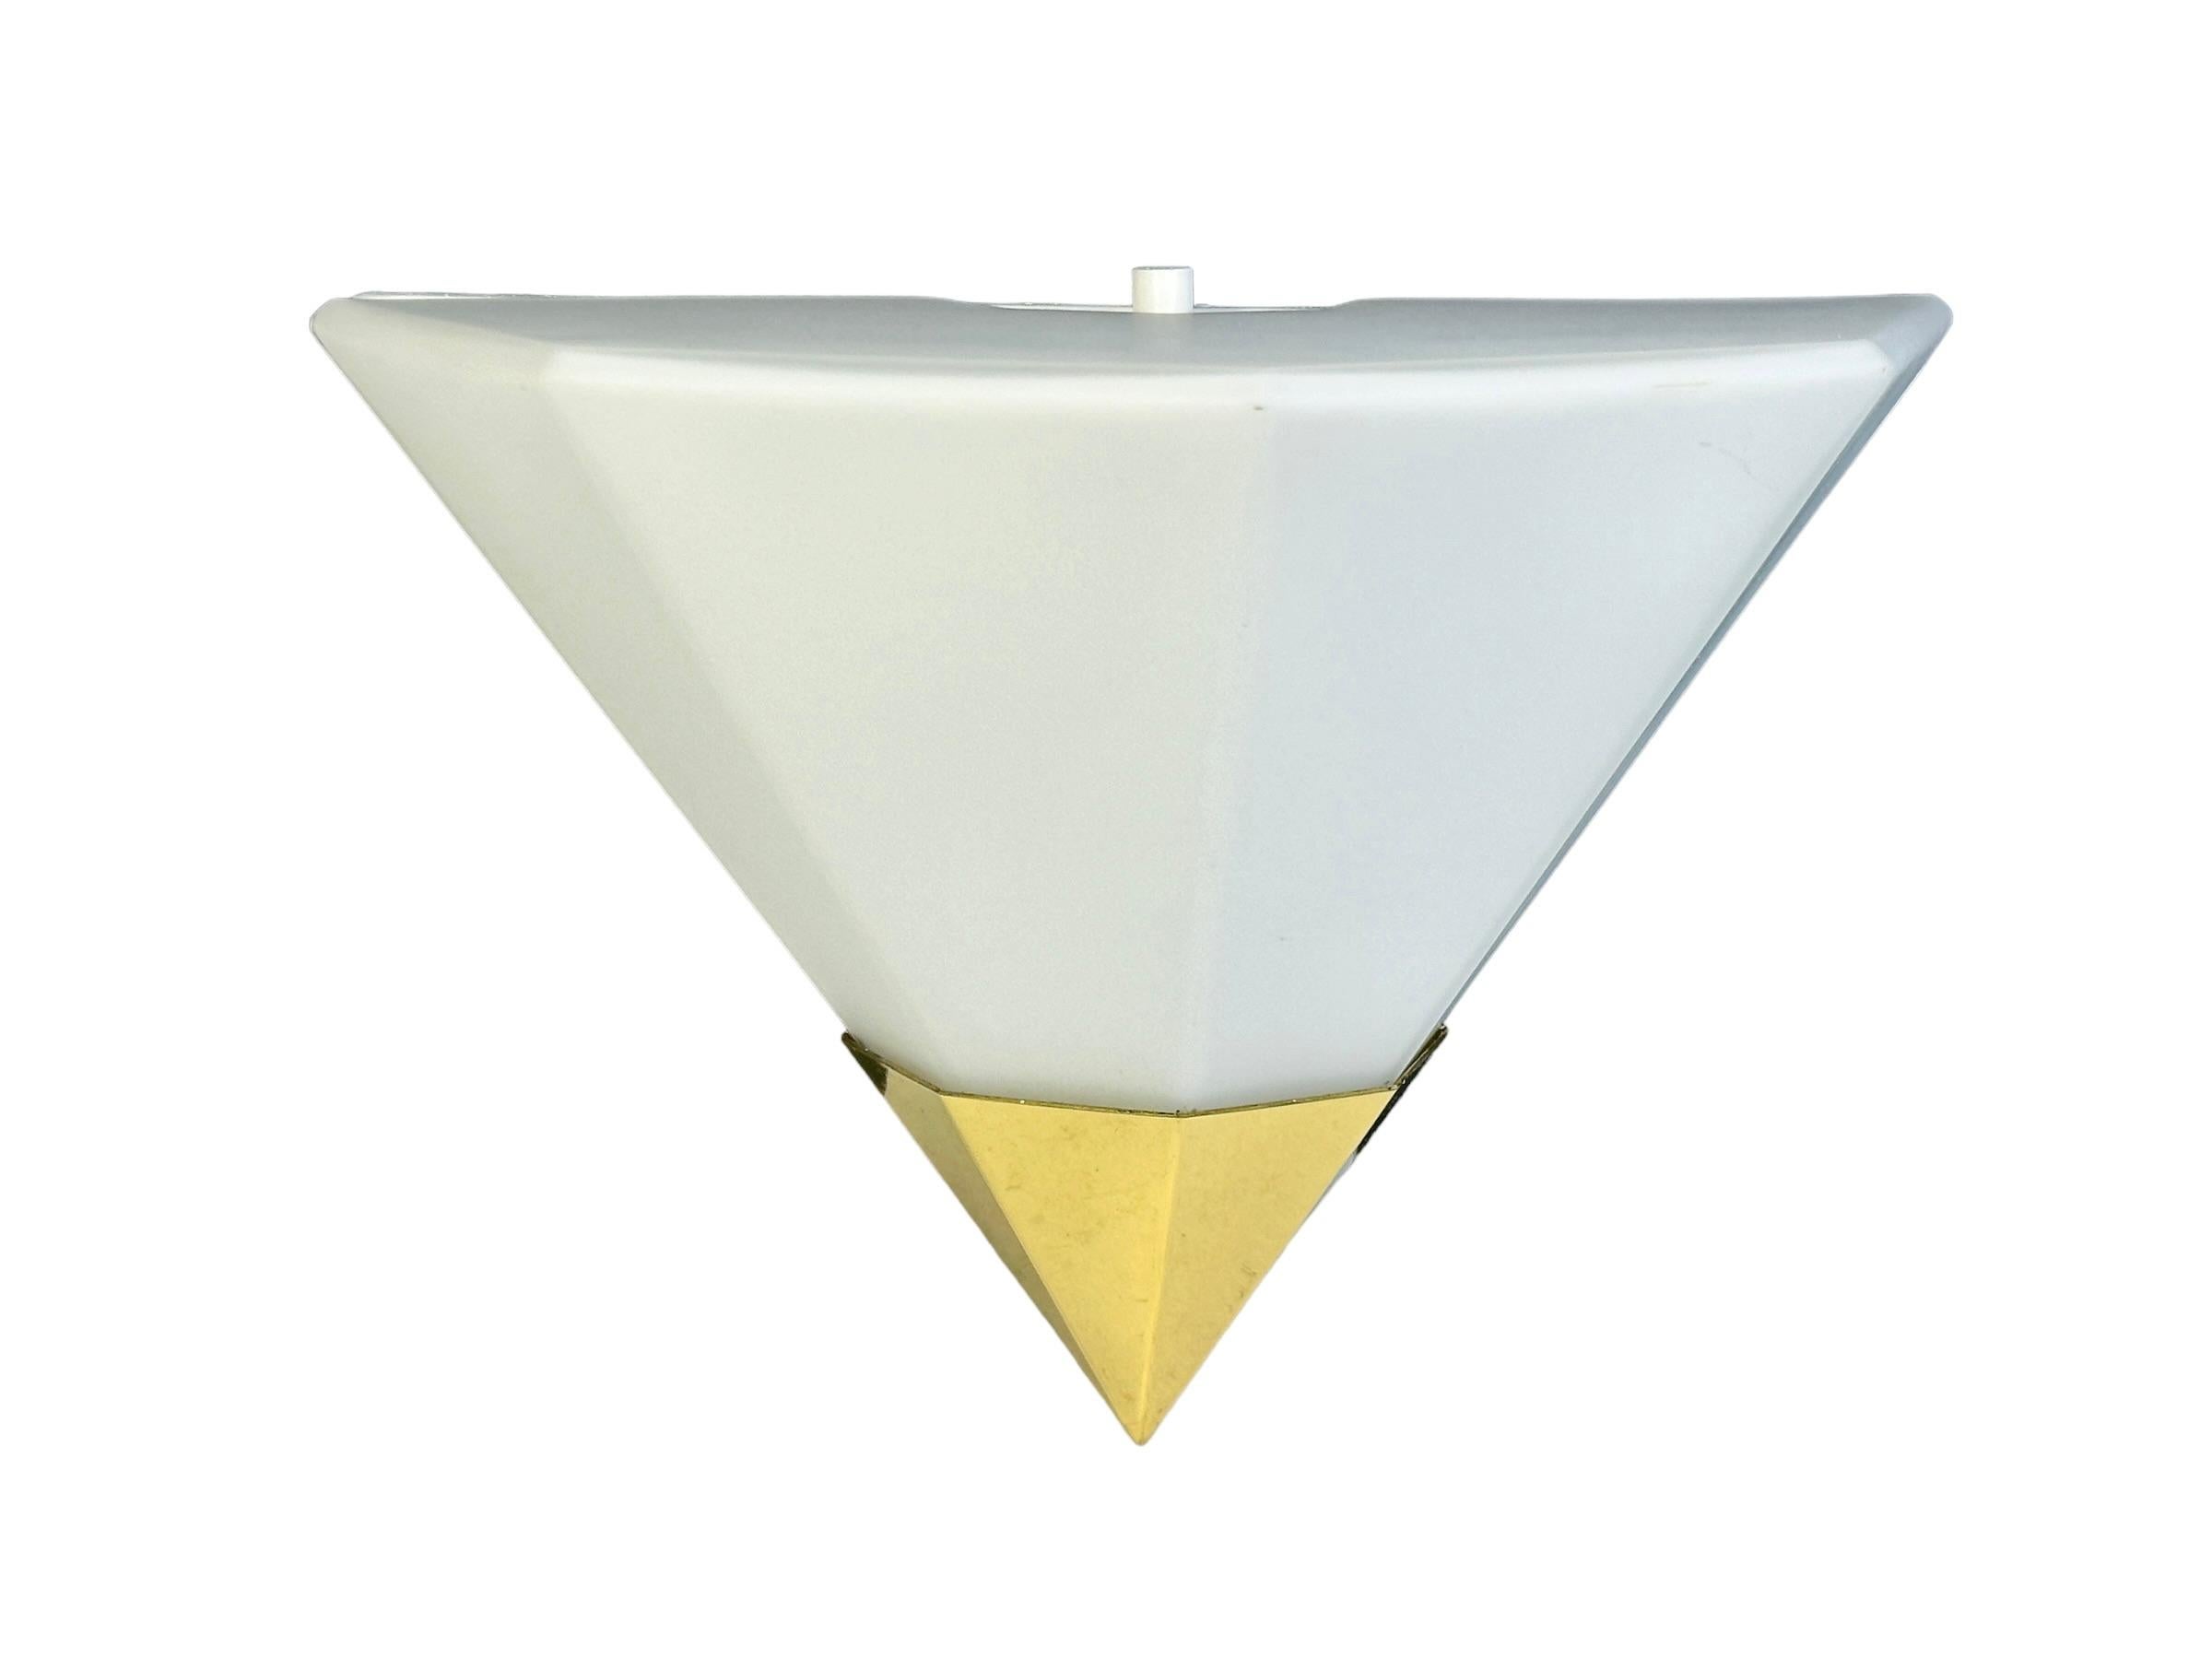 Petite pair of pyramid sconces manufactured by Glashütte Limburg. They have a beautiful cone shape and are made of solid brass and opaline glass. The inside is made of metal. Each Fixture requires one European E27 / 110 Volt Edison bulb, each bulb